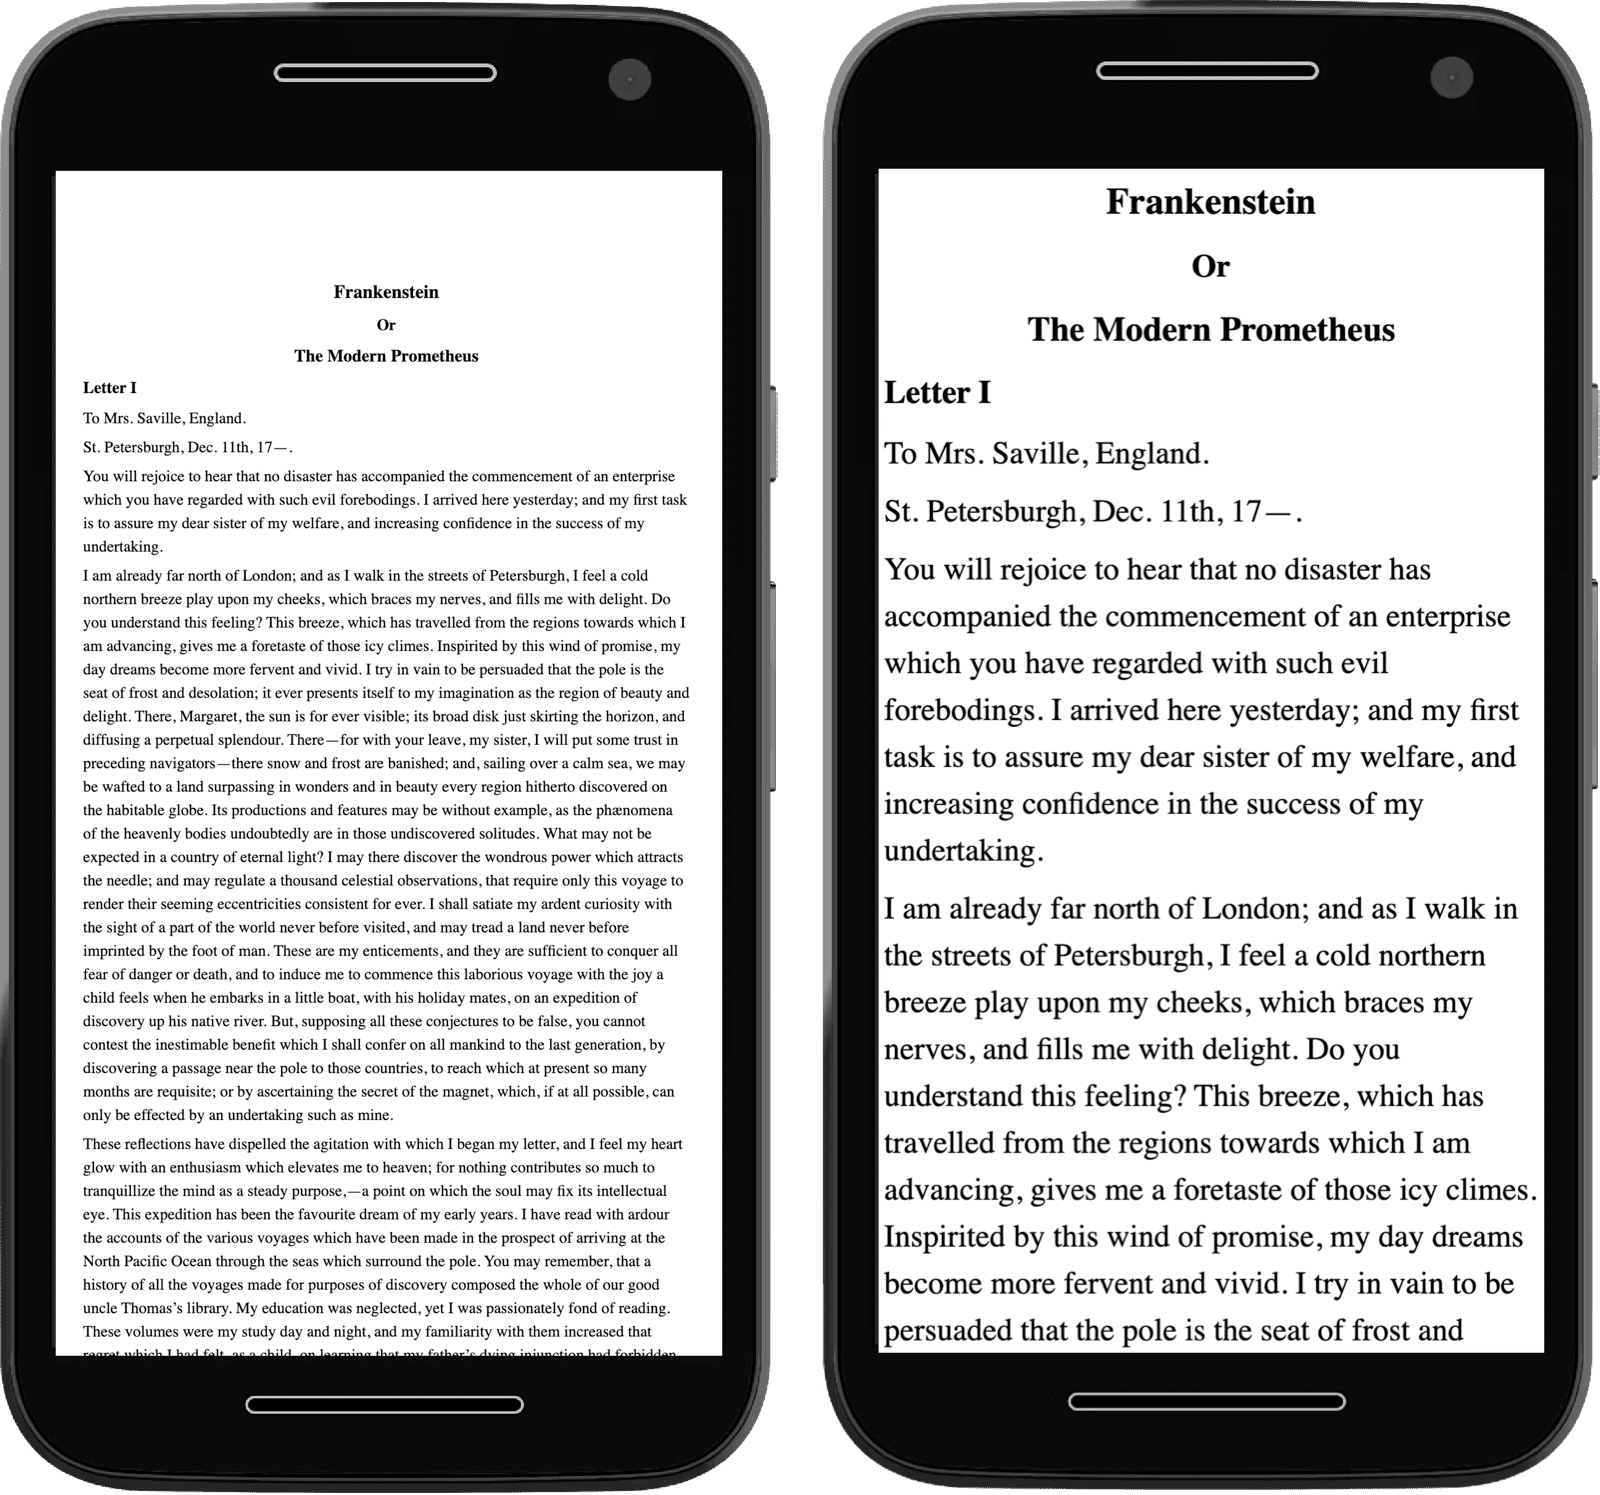 Images of two mobile phones containing text, one appearing zoomed out due to not having the meta tag in place.